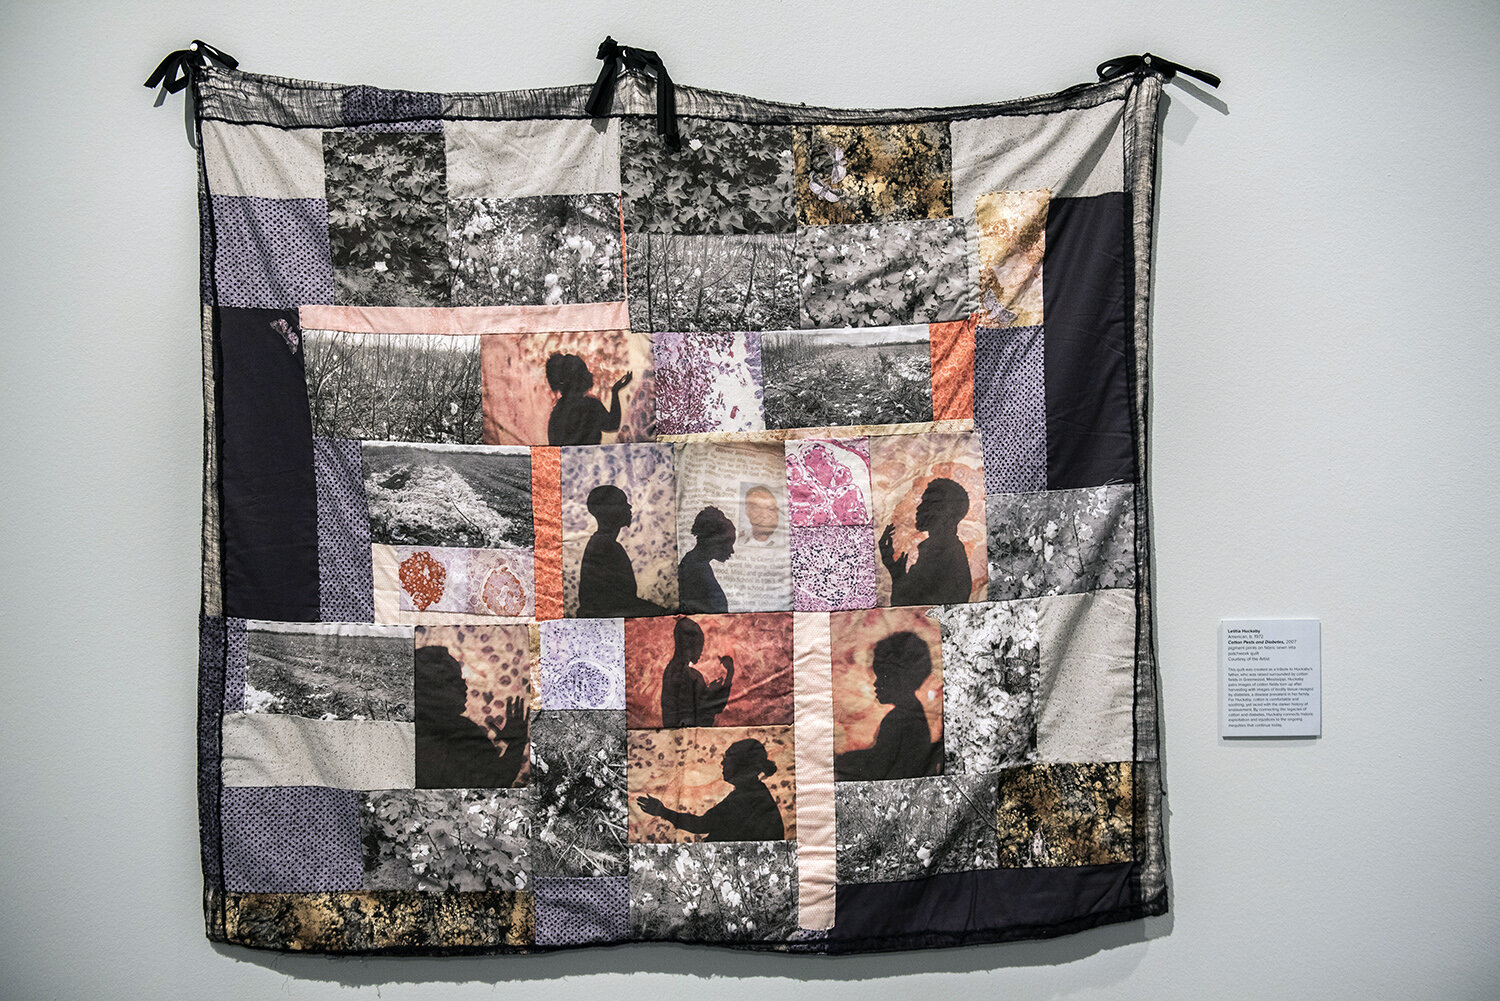 Letitia Huckaby, American, b. 1972, Cotton Pests and Diabetes, 2007, pigment prints on fabric sewn into patchwork quilt, Courtesy of the Artist